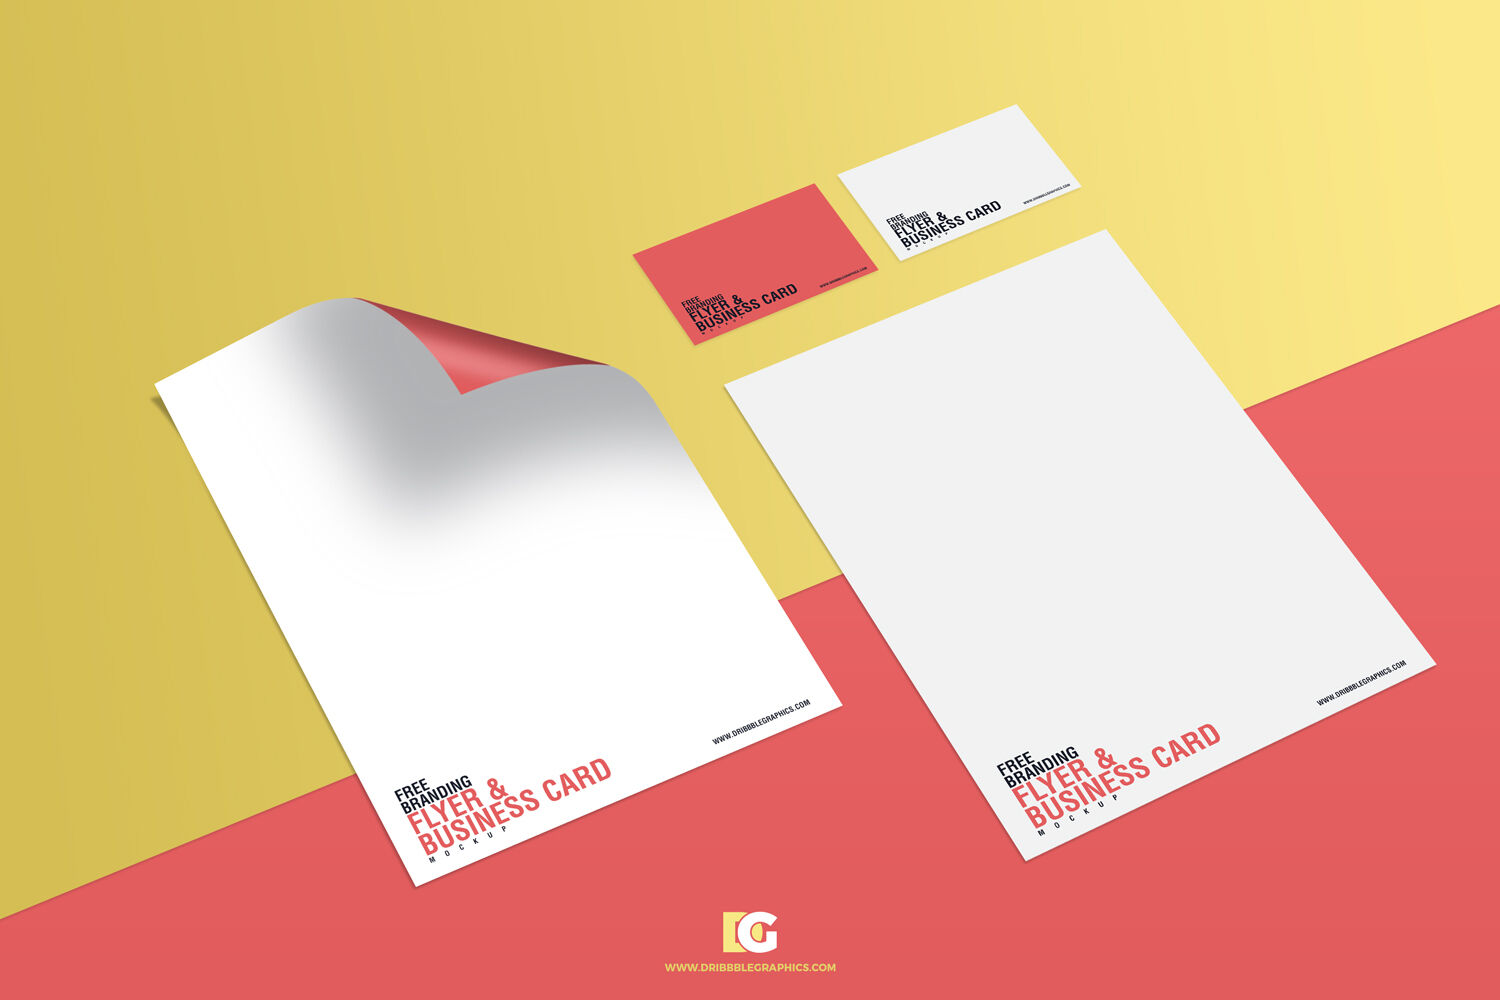 Top Side View of Branding Flyers and Business Cards Mockup FREE PSD